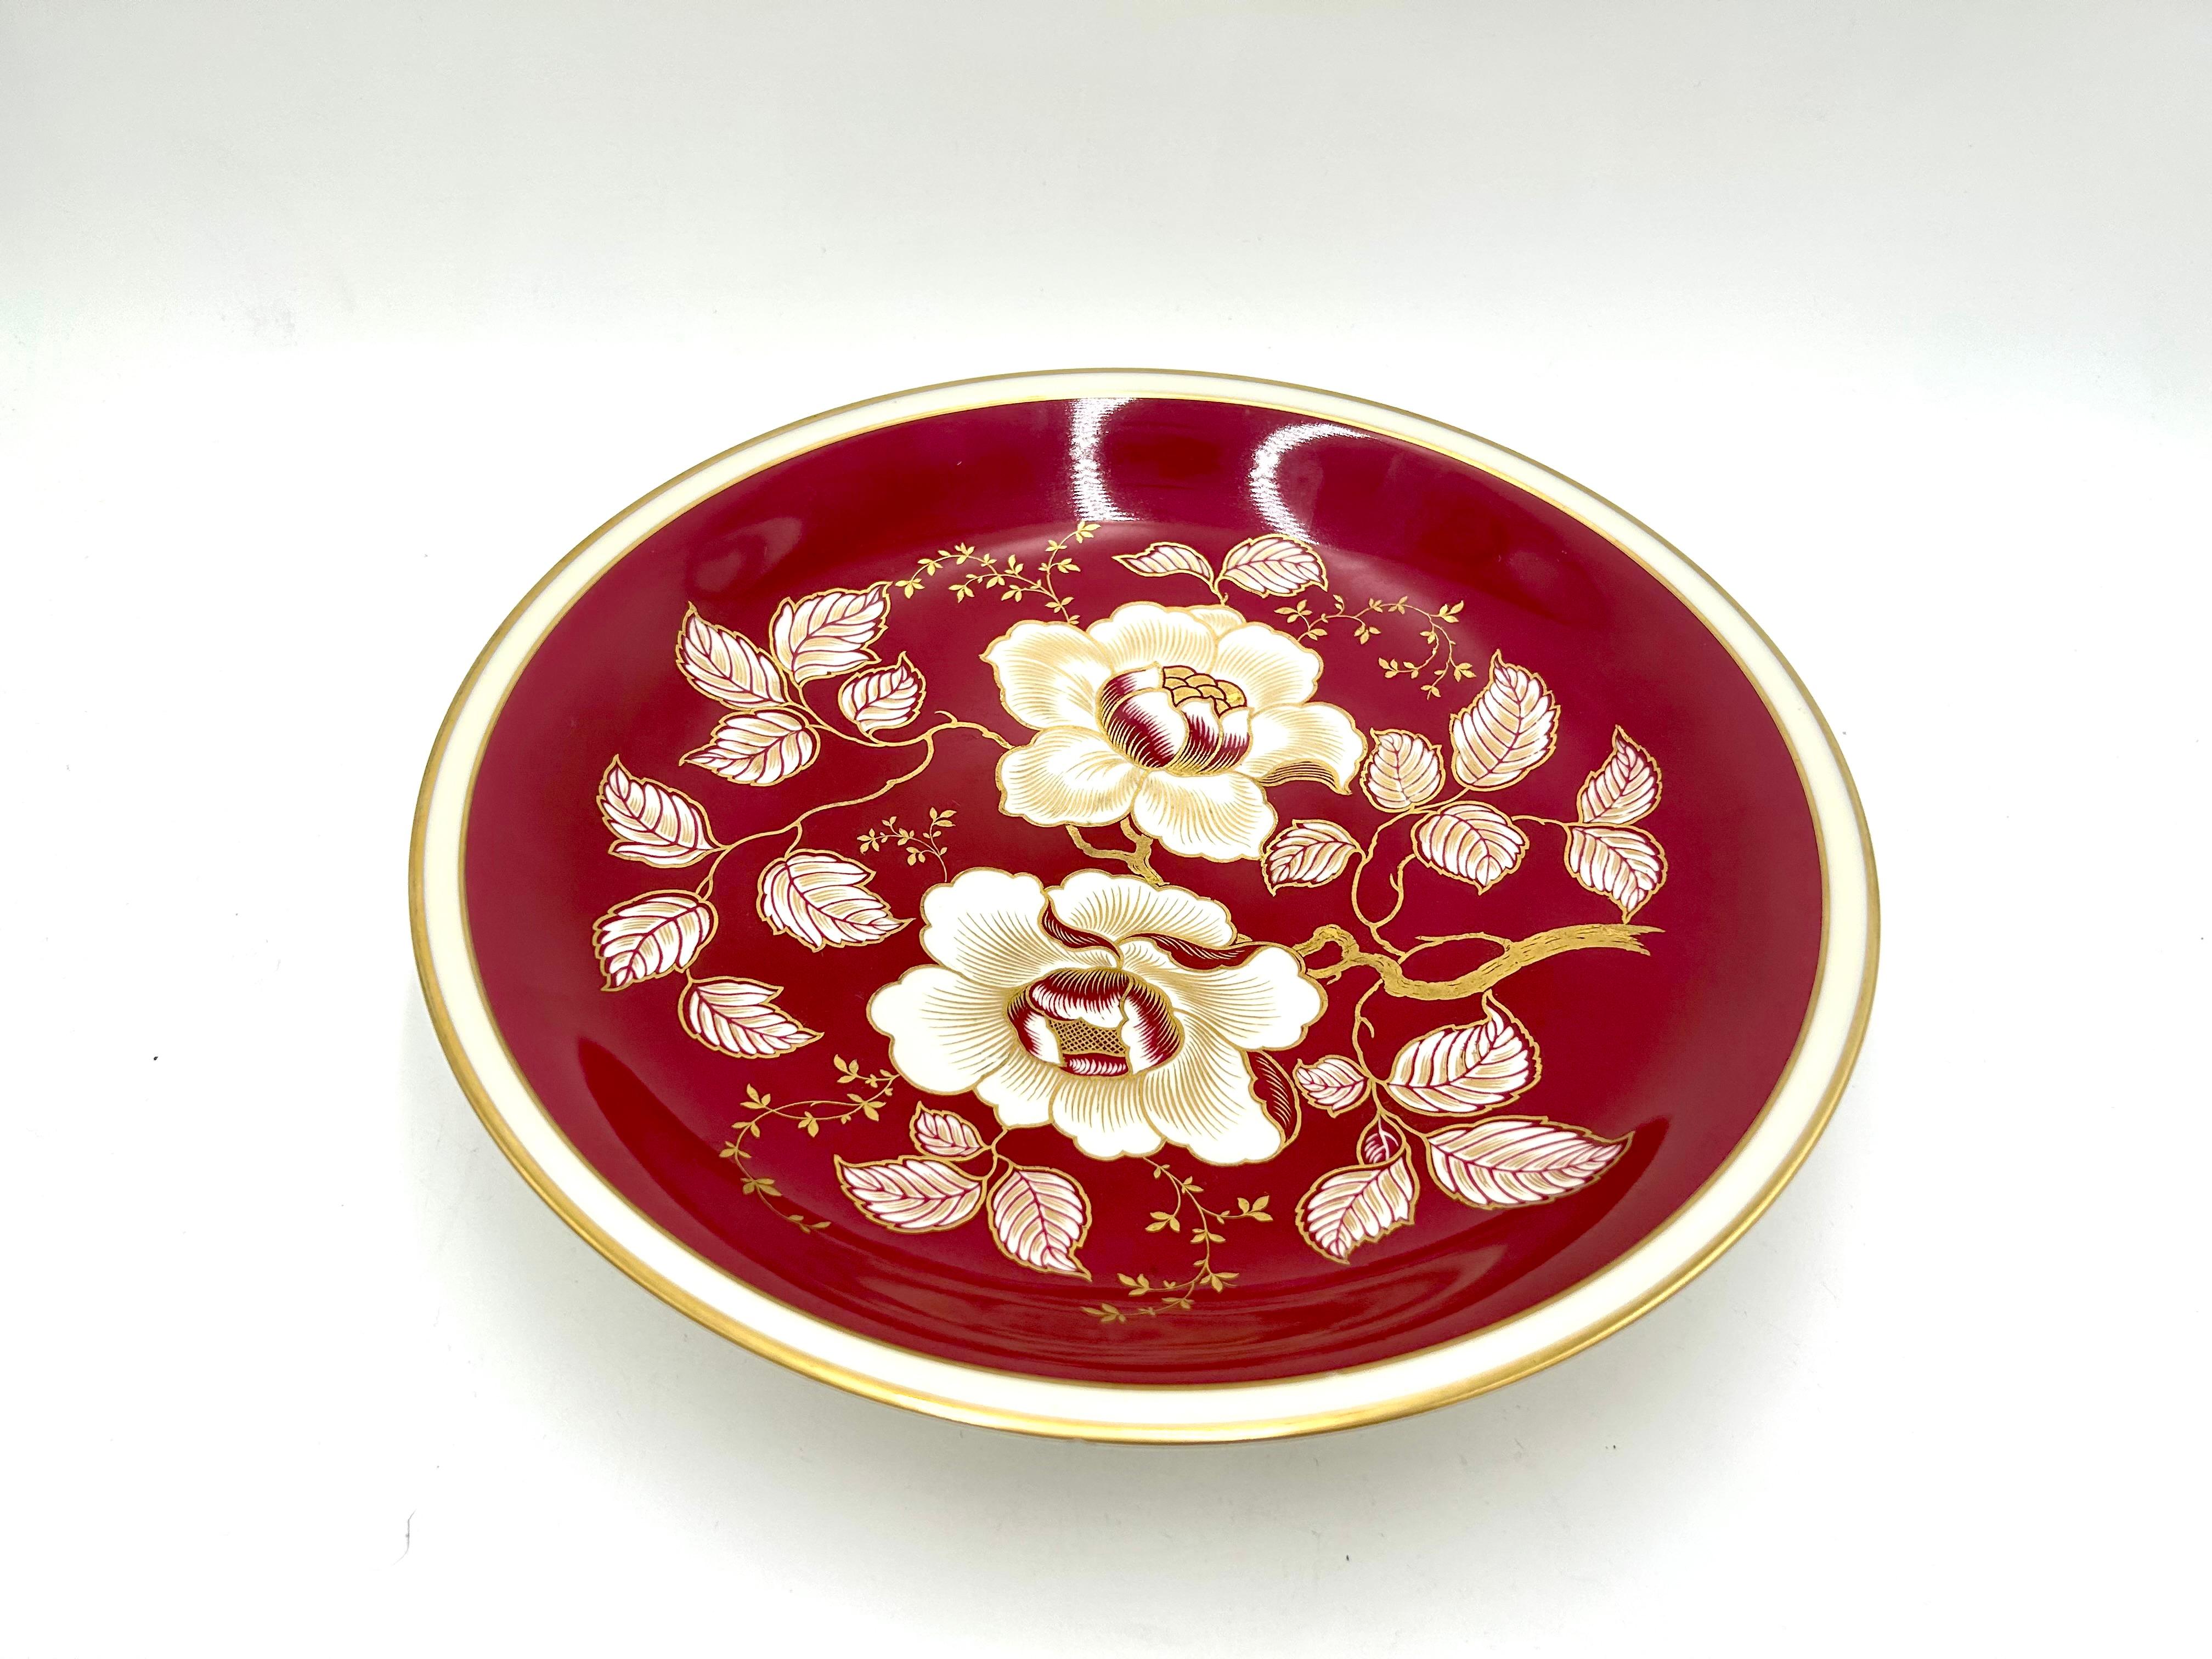 Beautiful porcelain platter made in Germany by Rosenthal.

Porcelain in the color of ecru, decorated with a motif of golden flowers on a maroon background.

The product is marked with a mark from 1949.

Very good condition - has a small chip